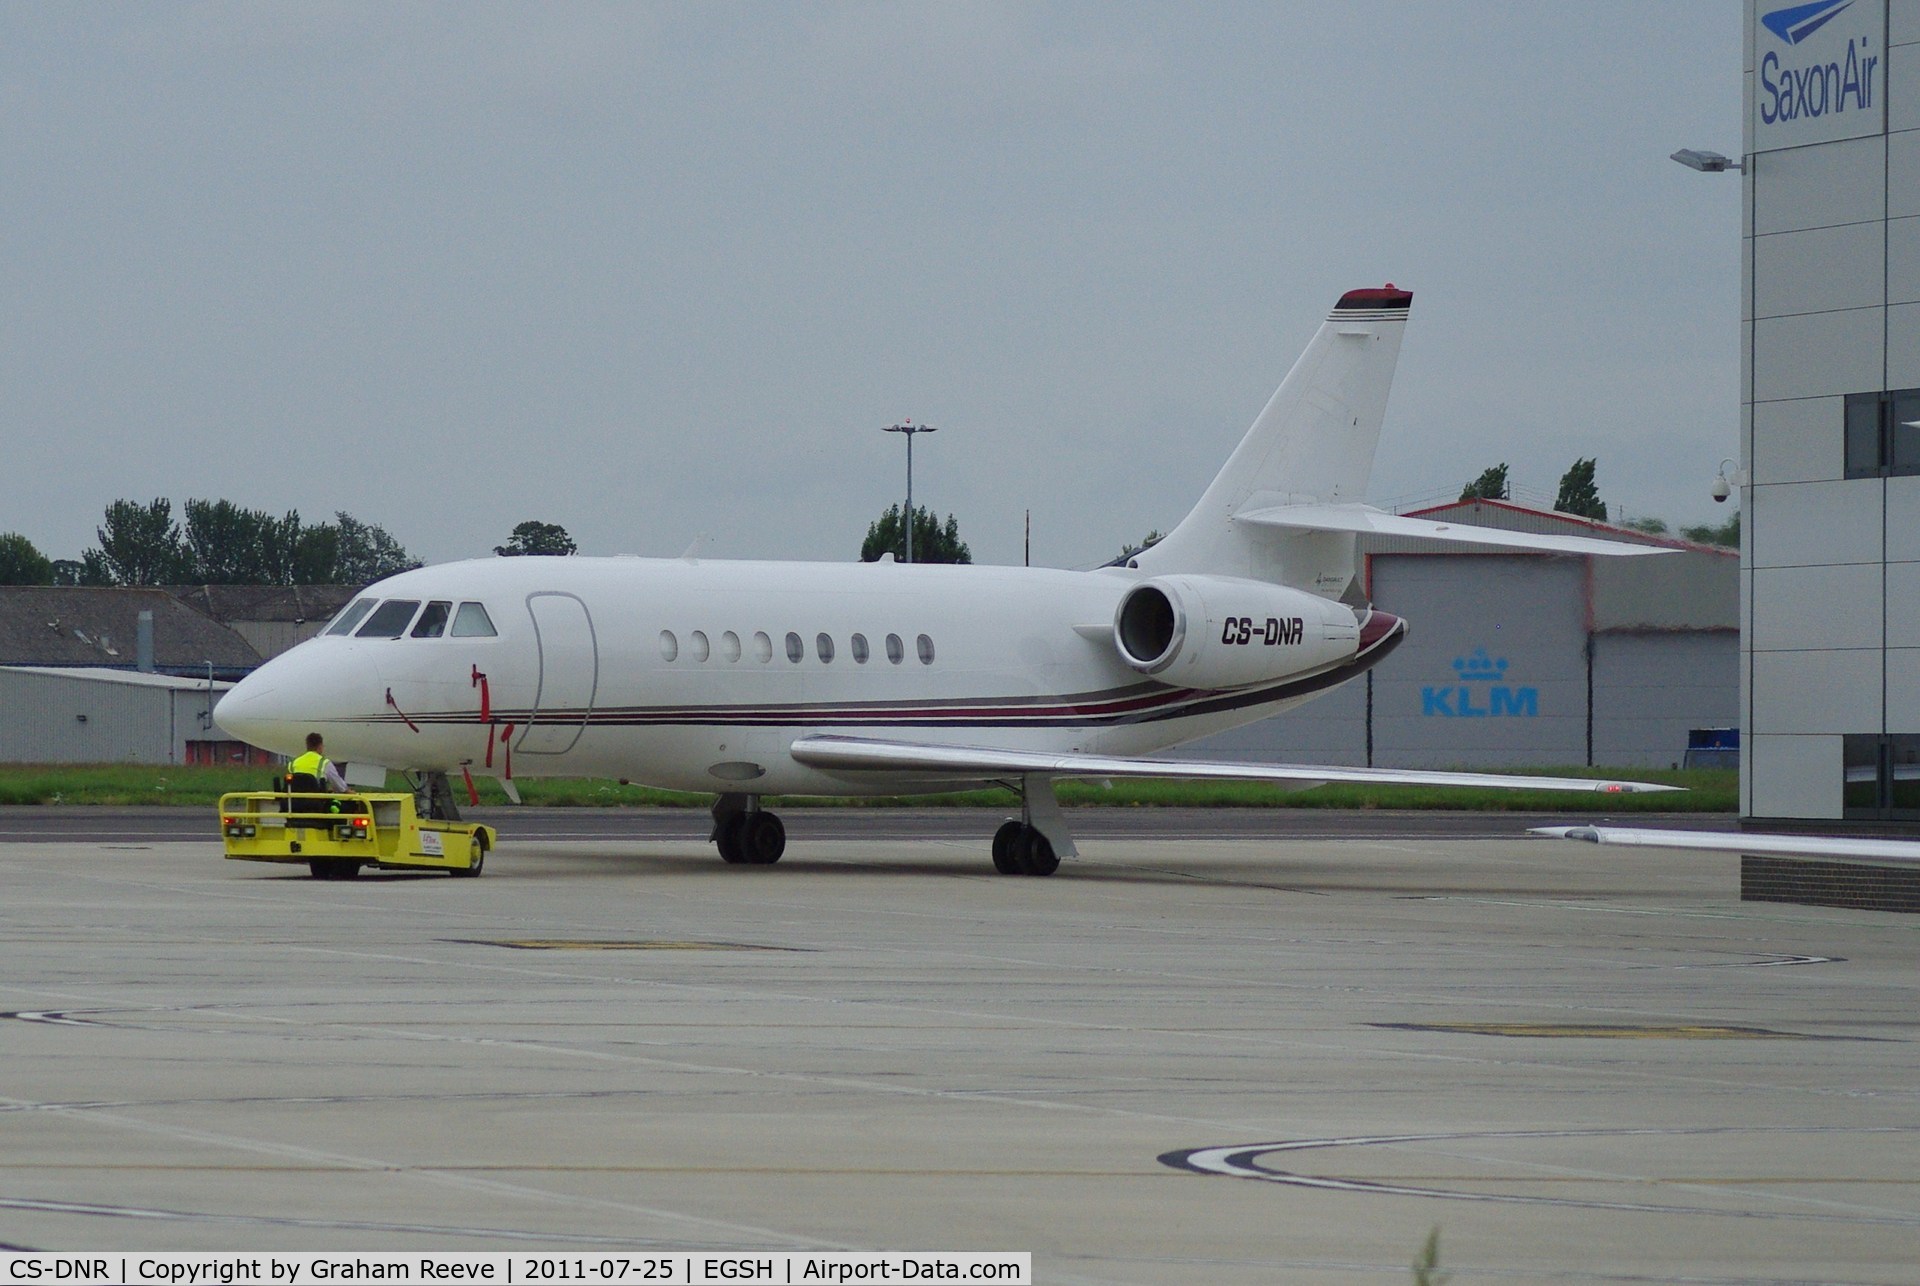 CS-DNR, 2000 Dassault Falcon 2000 C/N 120, Being moved.